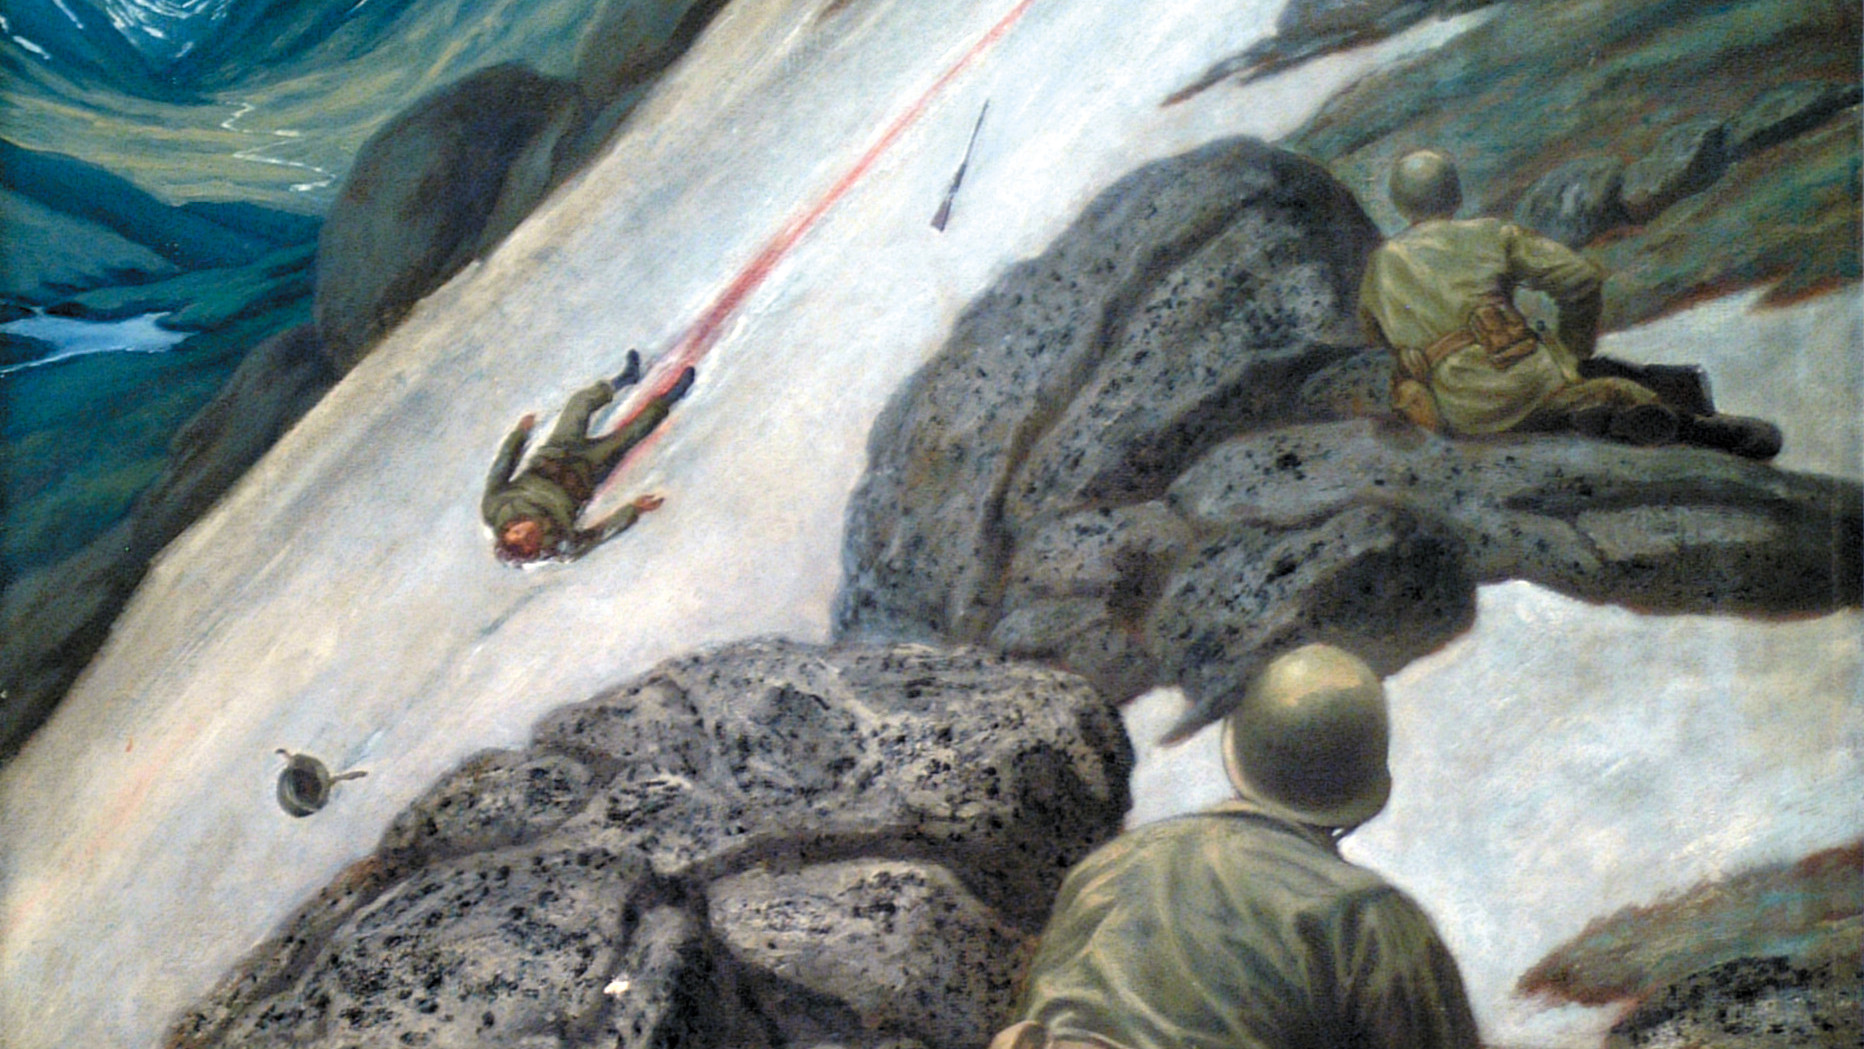 Hit by Japanese fire, a wounded American soldier slides to his icy grave in this combat painting. The bitter fighting on enemy-held Attu resulted in the recapture of the Aleutian island at a cost of 600 dead American soldiers, 1200 wounded.